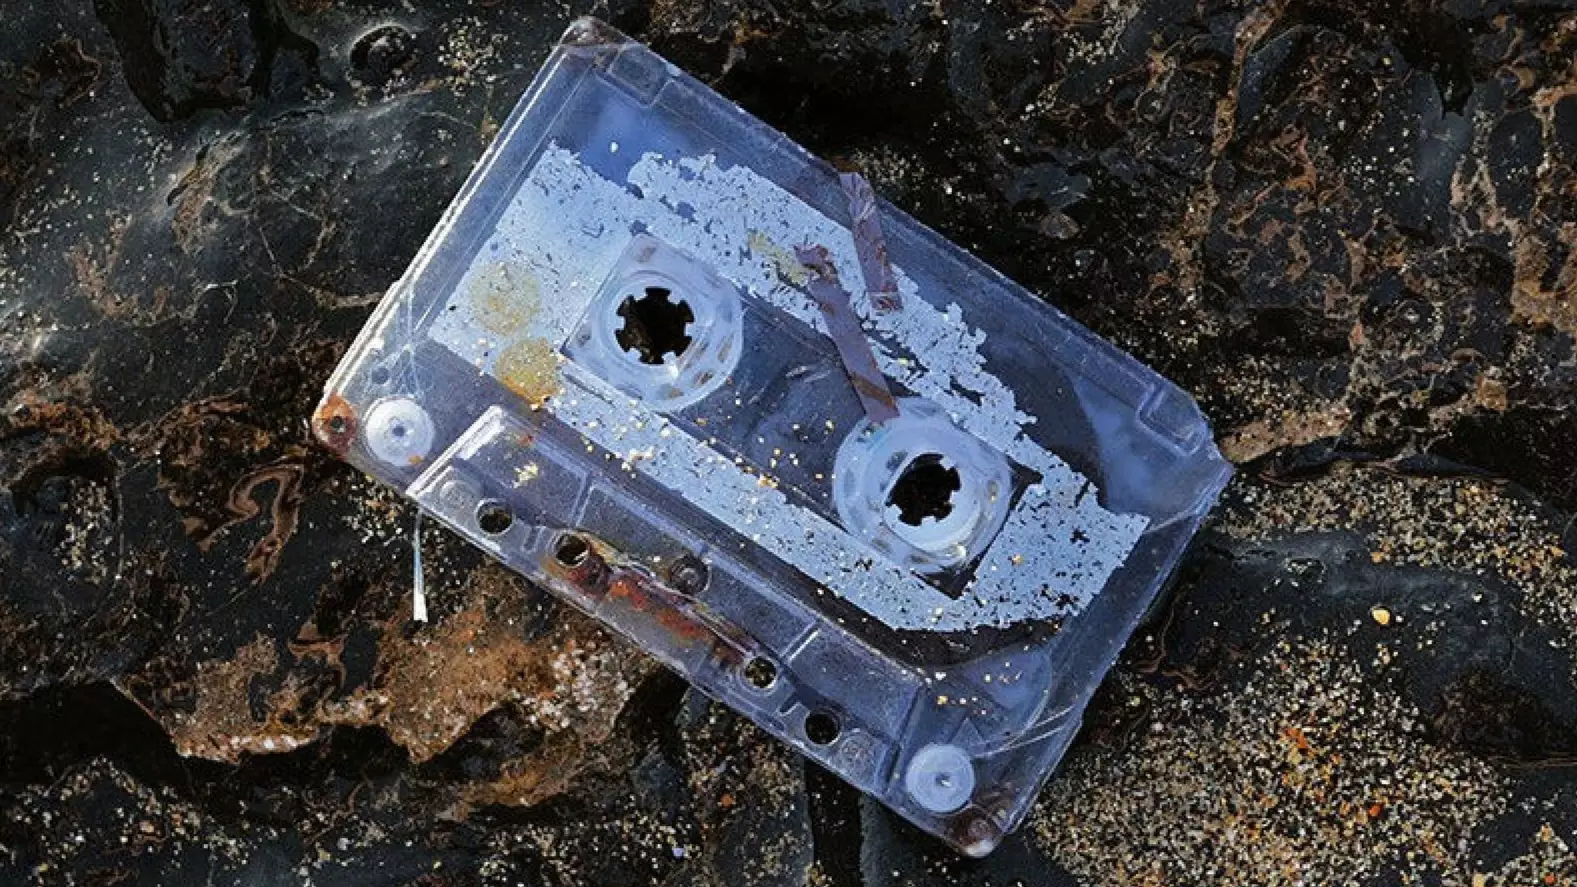 Mixtape Washes Up On Shore 25 Years After It Was Lost - And It Still Works